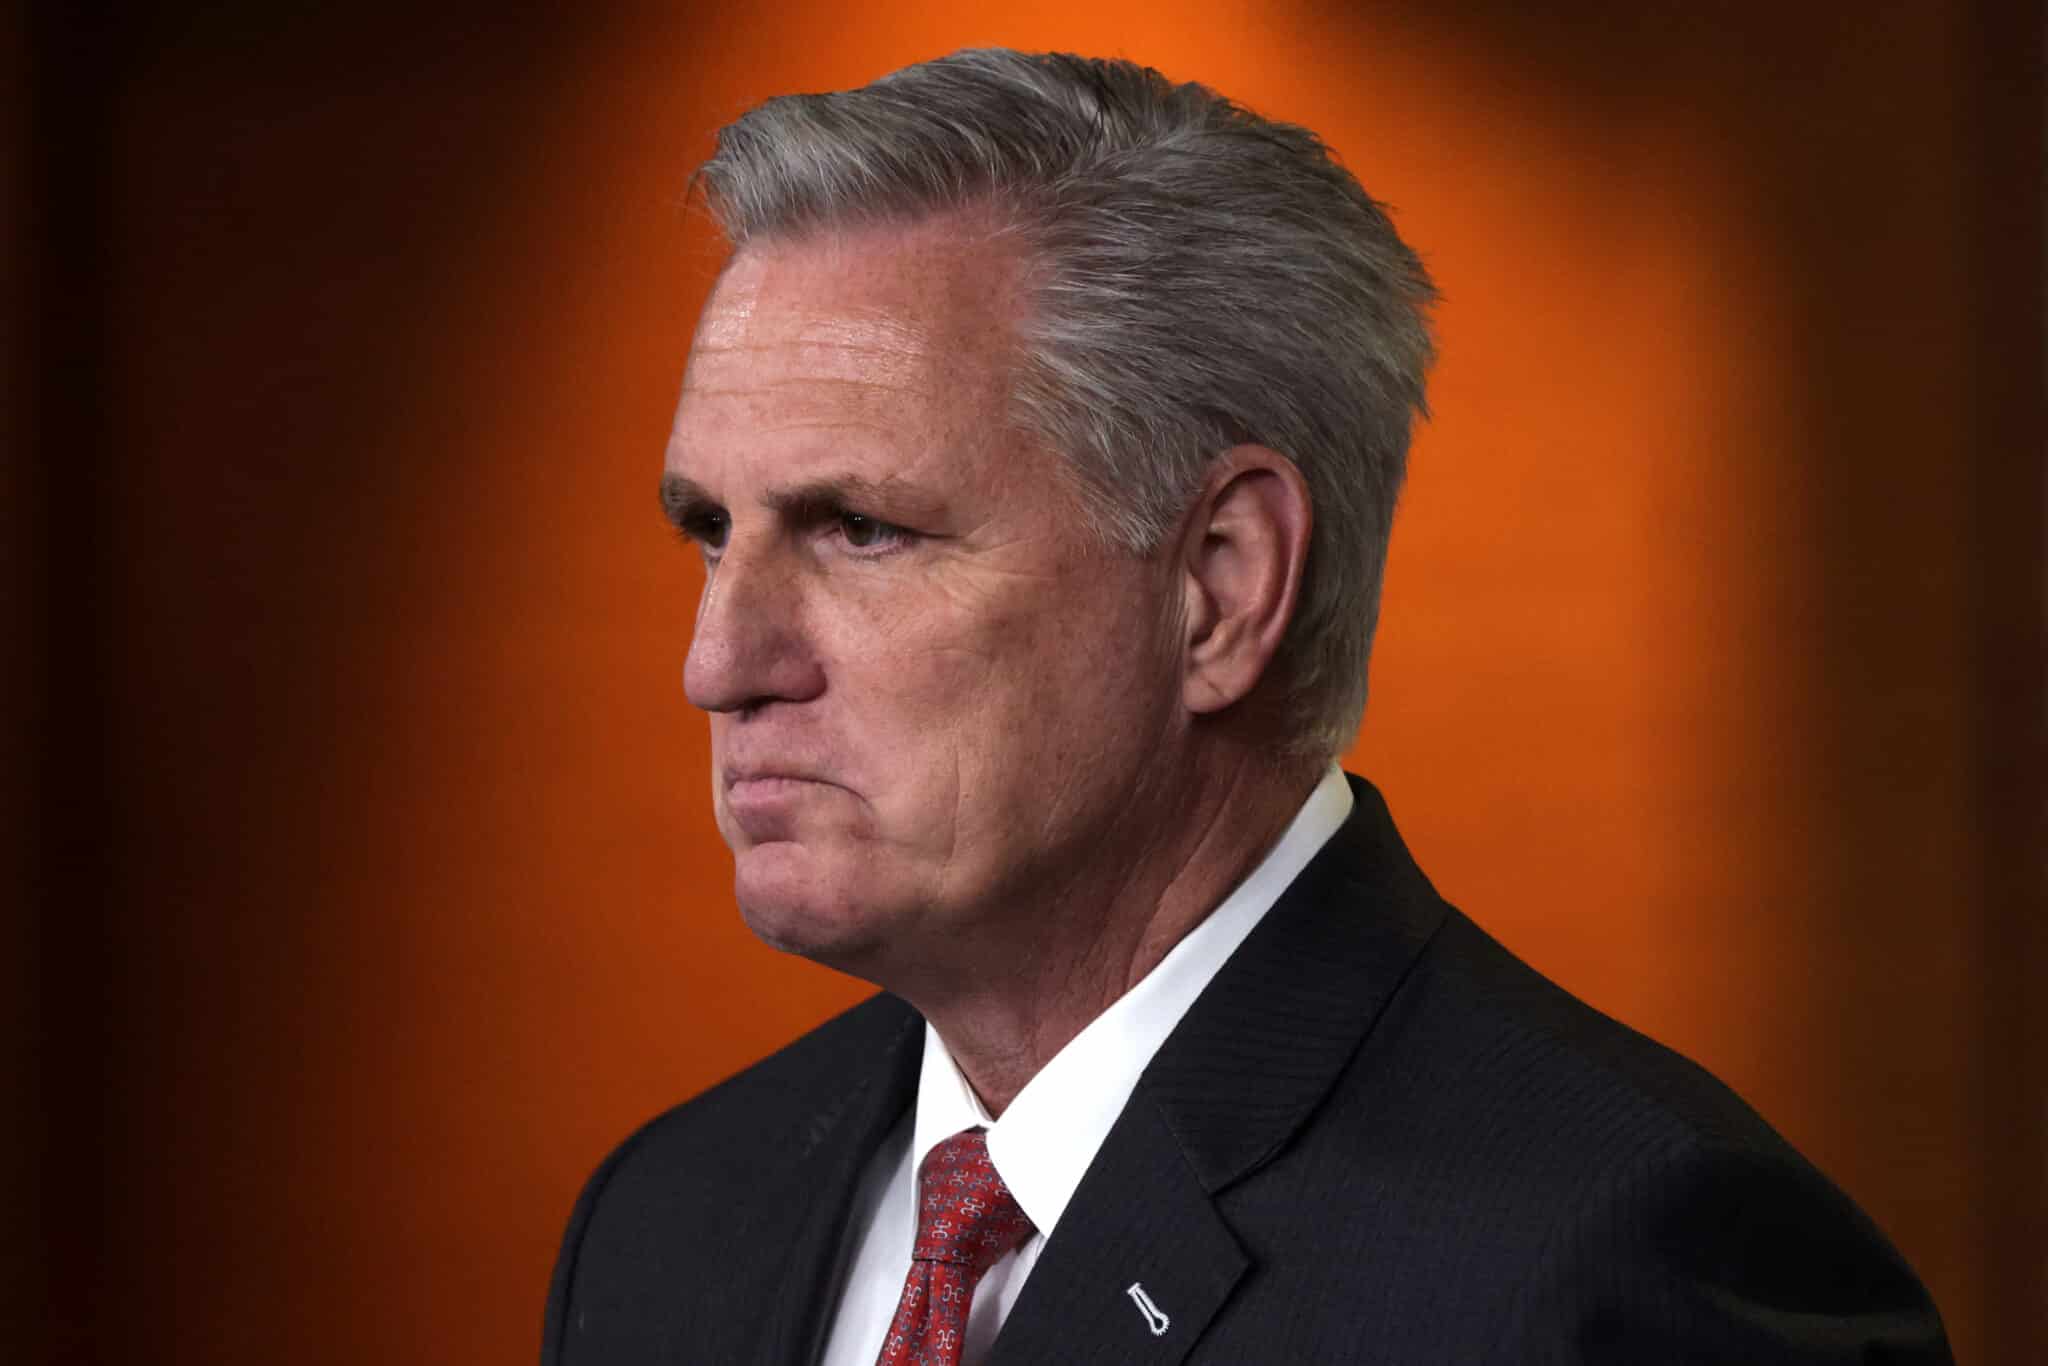 WASHINGTON, DC - JULY 01:  U.S. House Minority Leader Rep. Kevin McCarthy (R-CA) speaks during a weekly news conference at the U.S. Capitol July 01, 2021 in Washington, DC. McCarthy held a weekly news conference to answer questions from members of the press.  (Photo by Alex Wong/Getty Images)